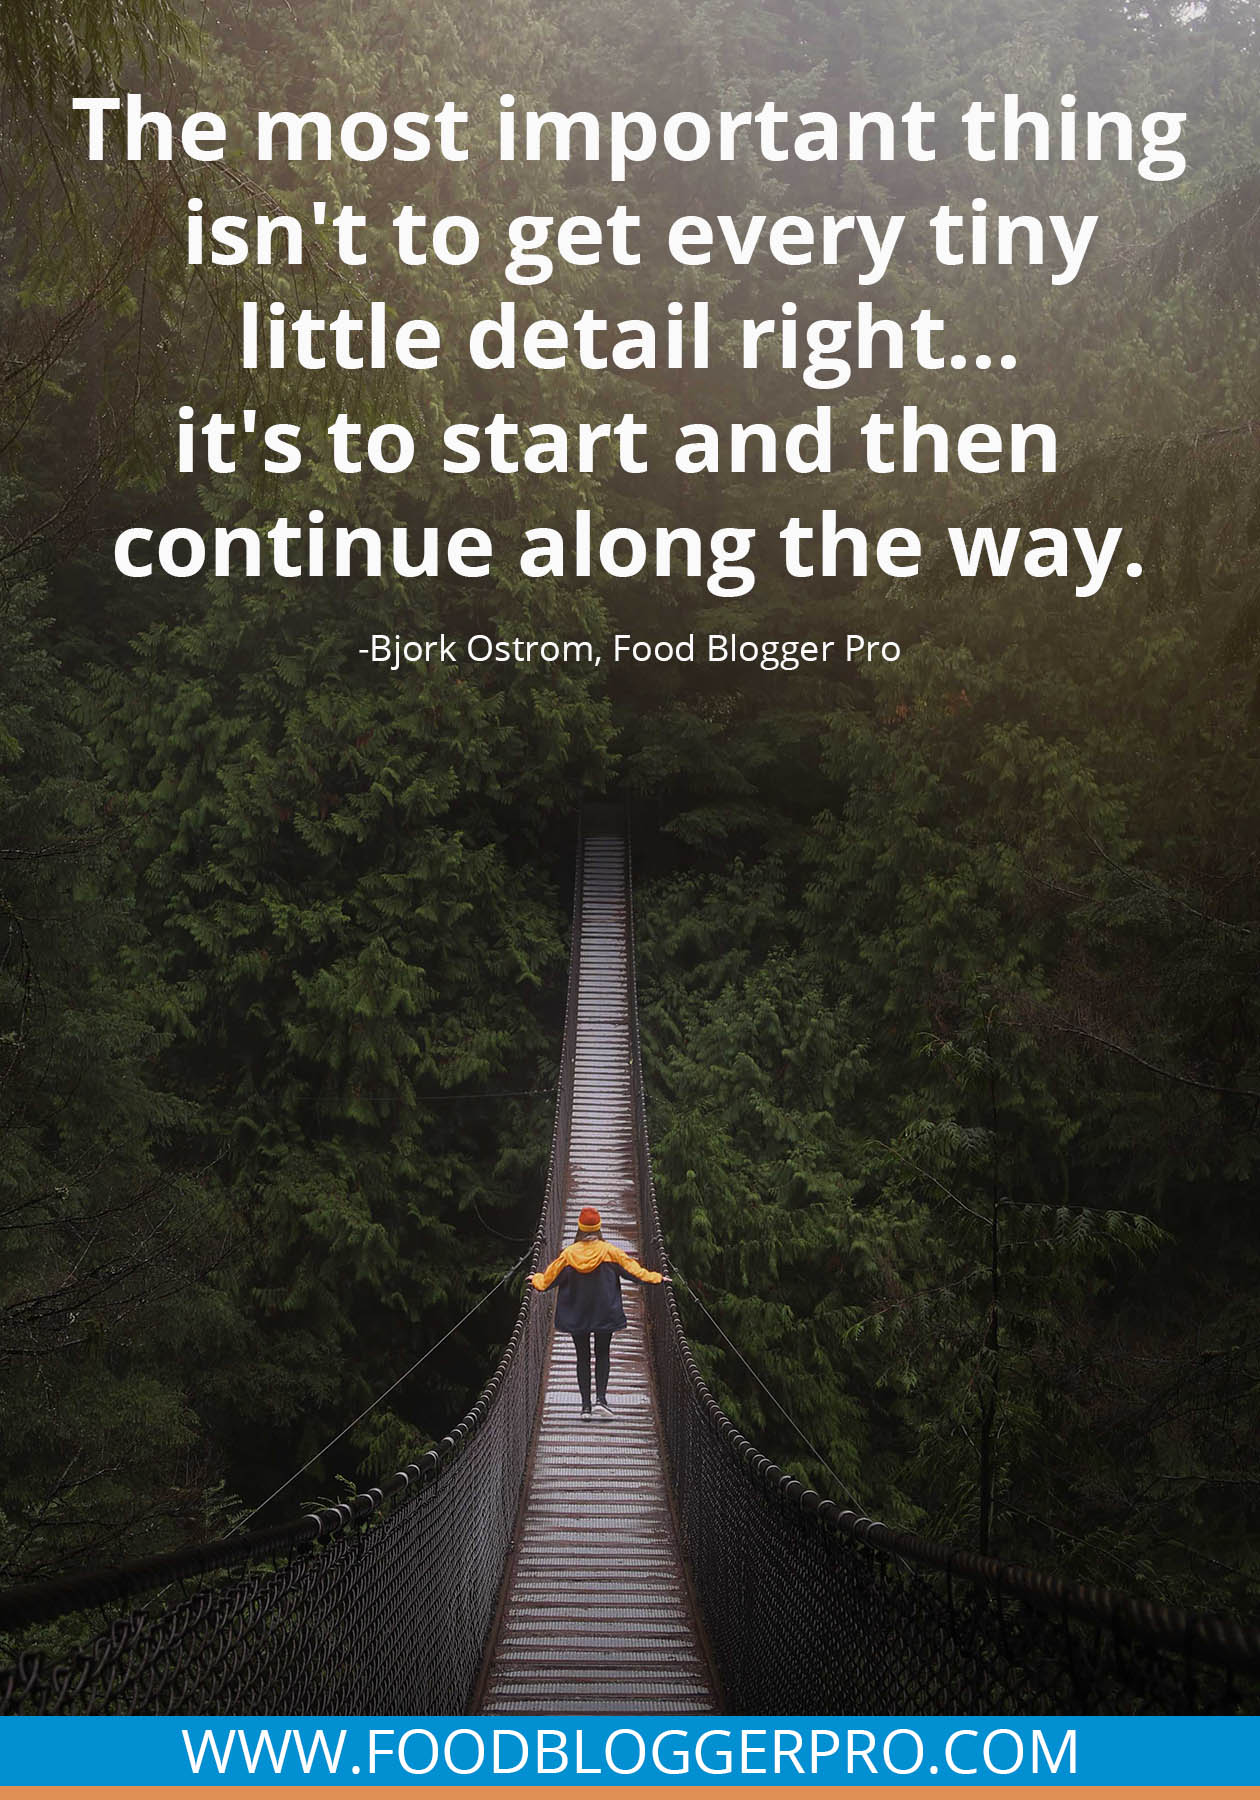 A quote from Bjork Ostrom’s appearance on the Food Blogger Pro podcast that says, 'The most important thing isn’t to get every tiny little detail right…it’s to start and then continue along the way.'